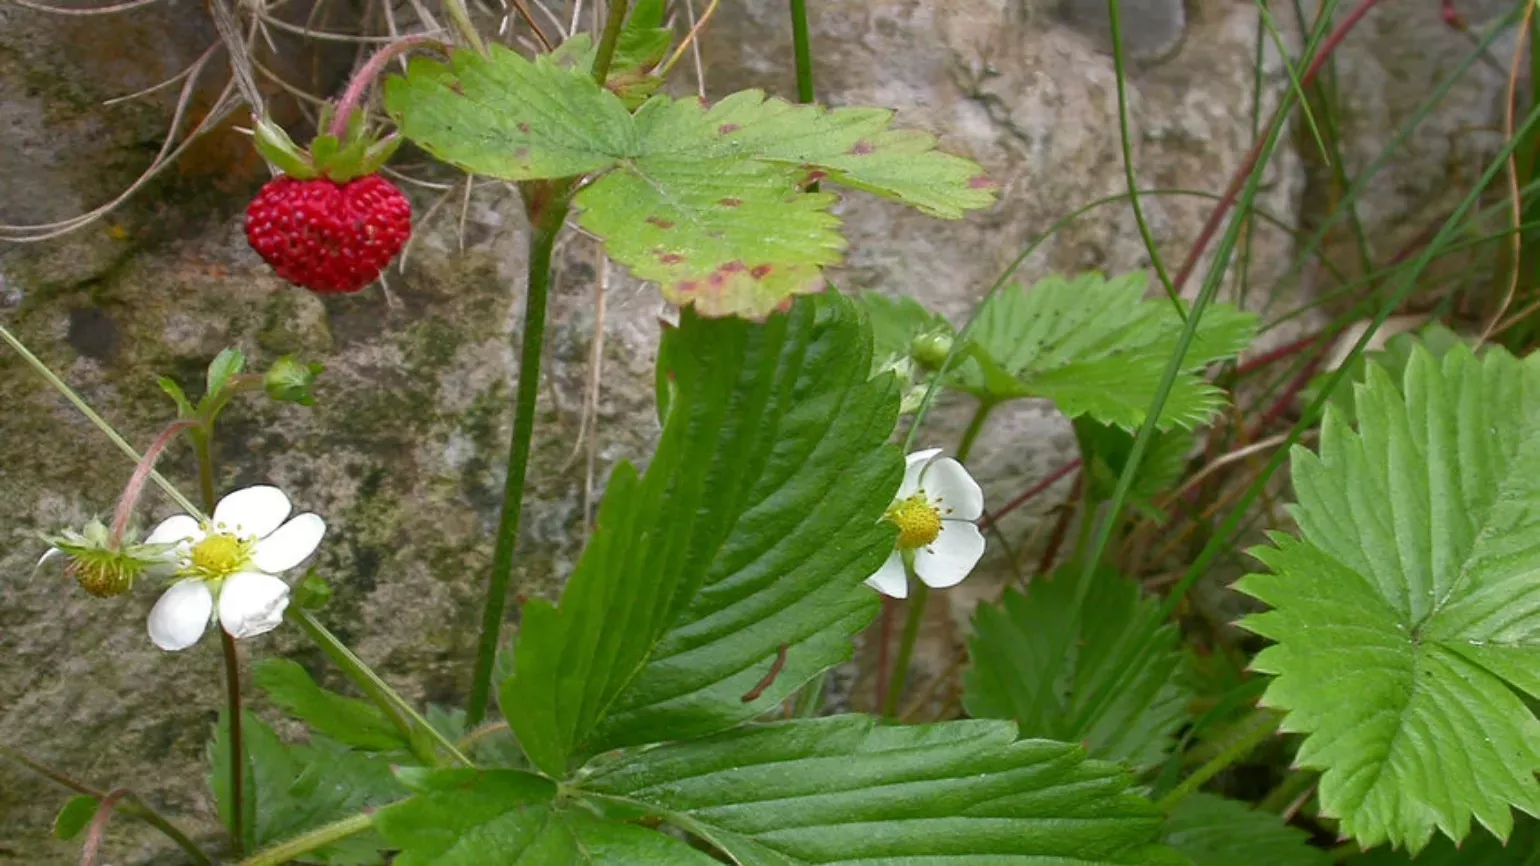 Juicy, red fruits, delicate, white flowers and green leaves